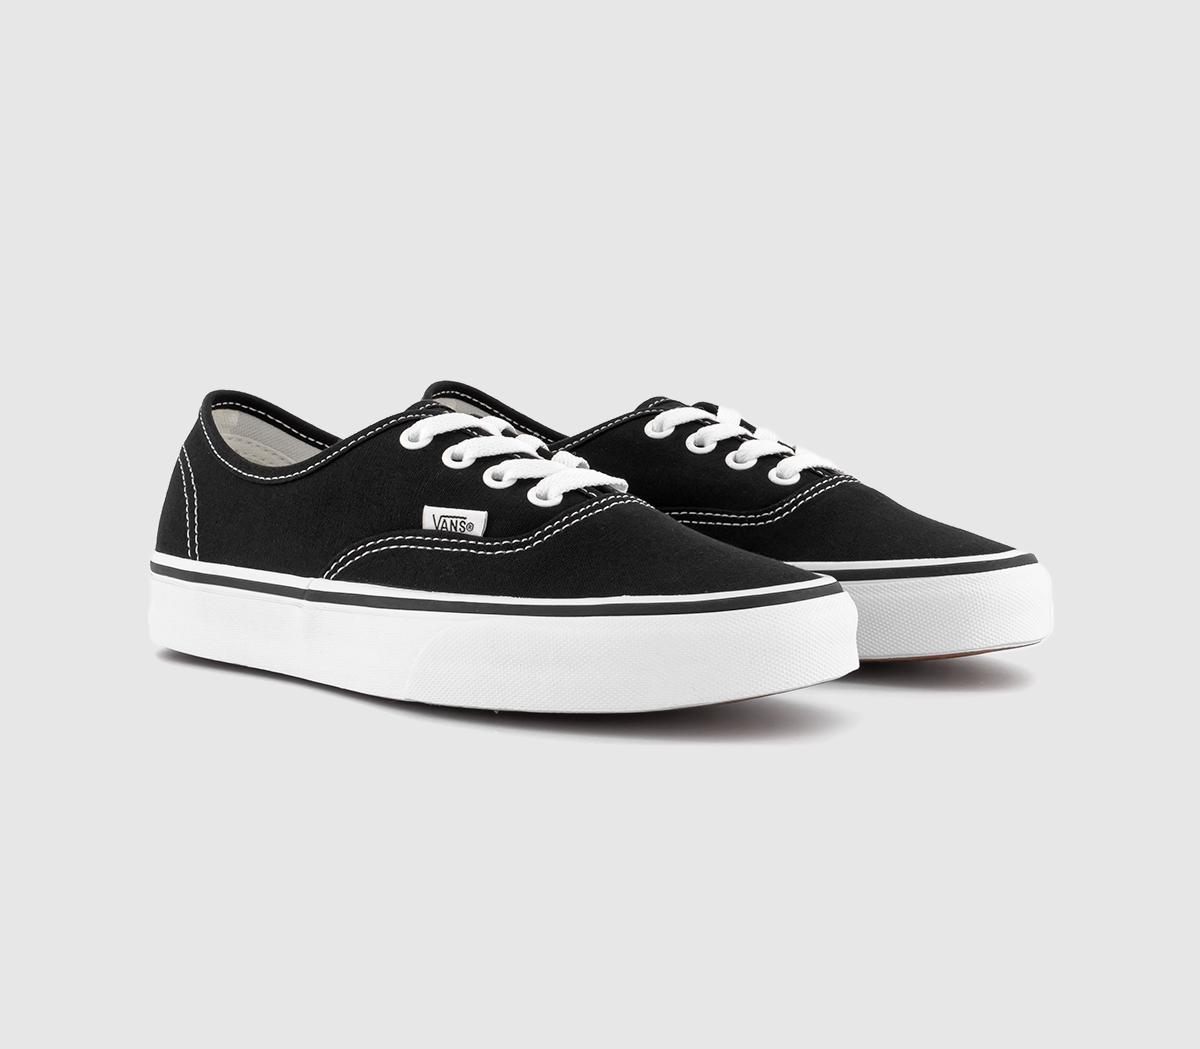 Vans Mens Authentic Trainers In Black And White, 7